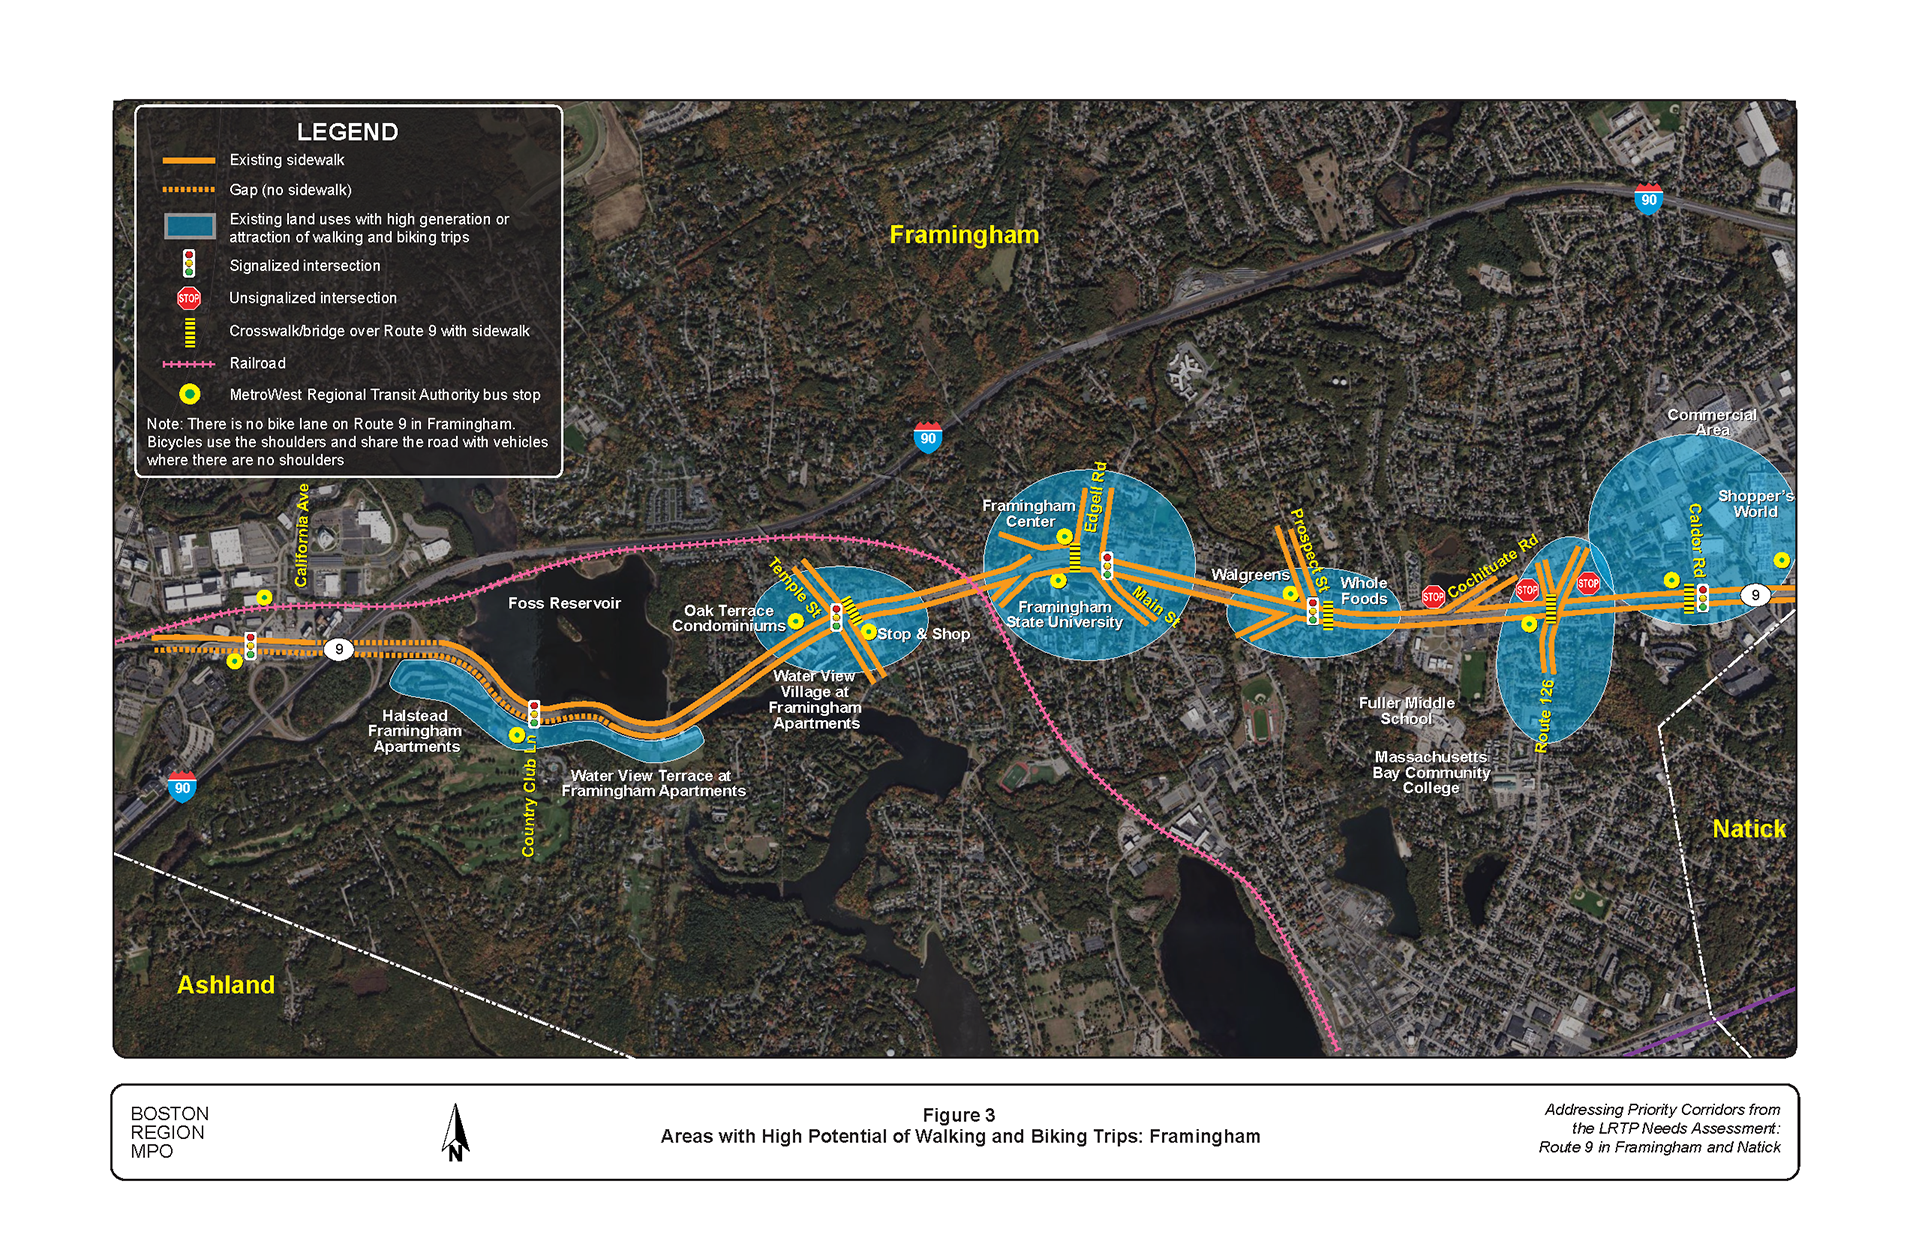 Figure 3 is a map of the corridor showing the areas with high potential of walking and biking trips in Framingham